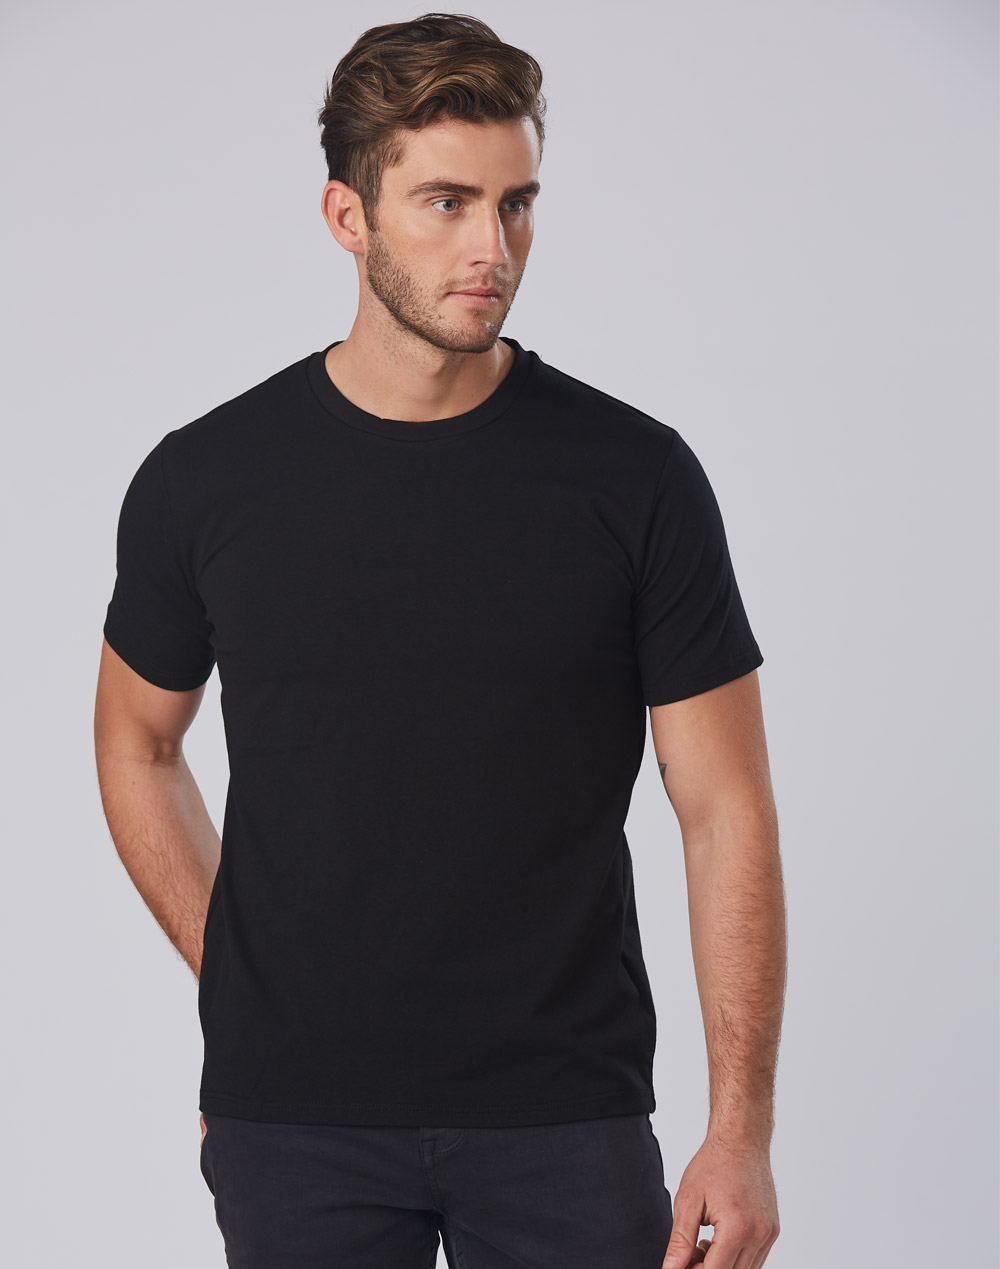 Custom Mens Super Fitted Cotton Tee Shirts Online in Australia